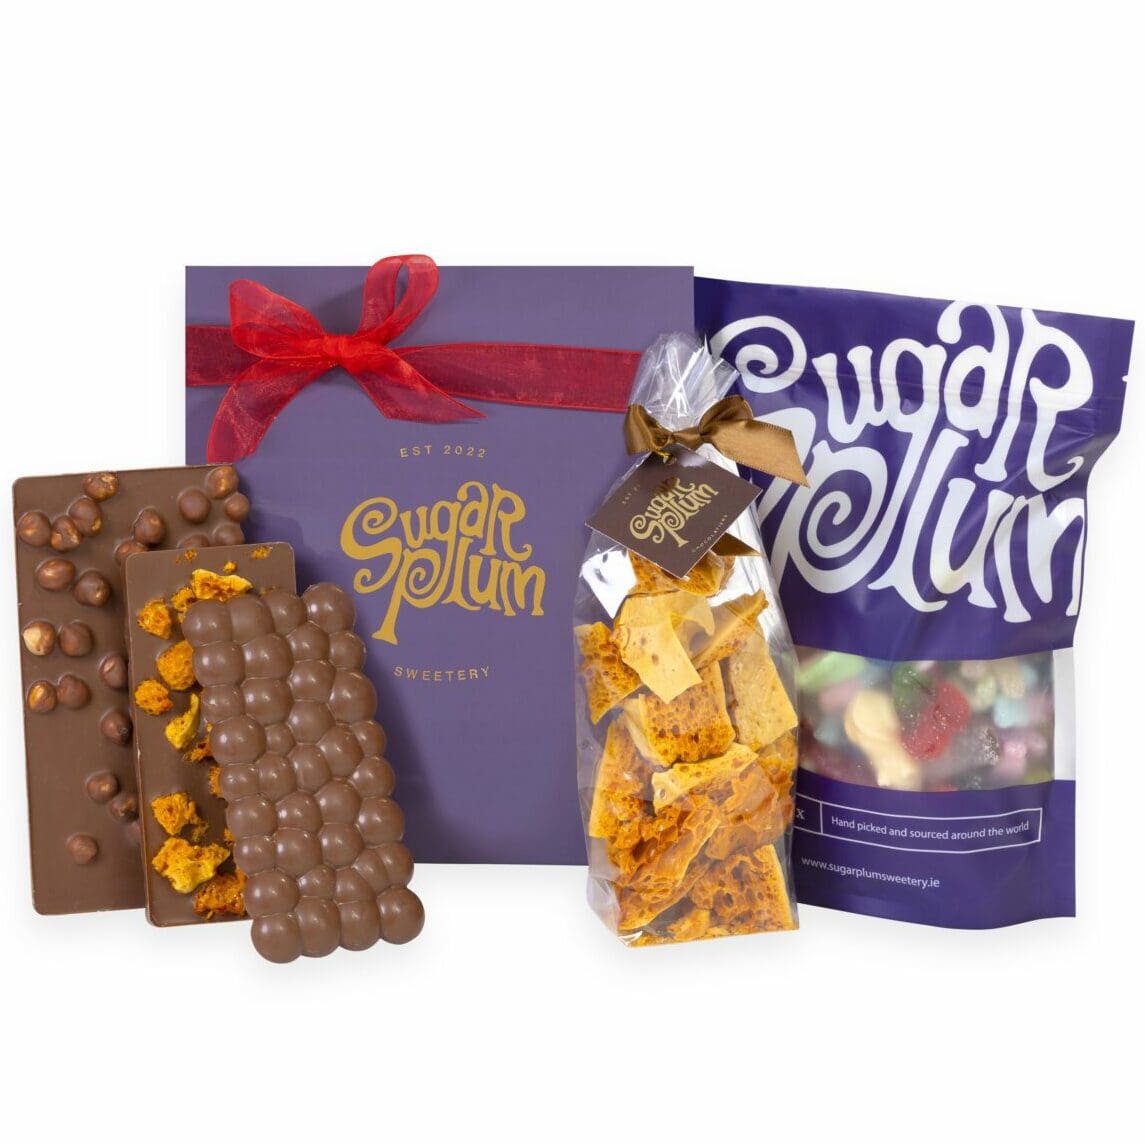 Elegant Classic Gift Hamper with a selection of homemade chocolate treats, wrapped with a ribbon, showcasing a variety of chocolates curated by Master Chocolatiers